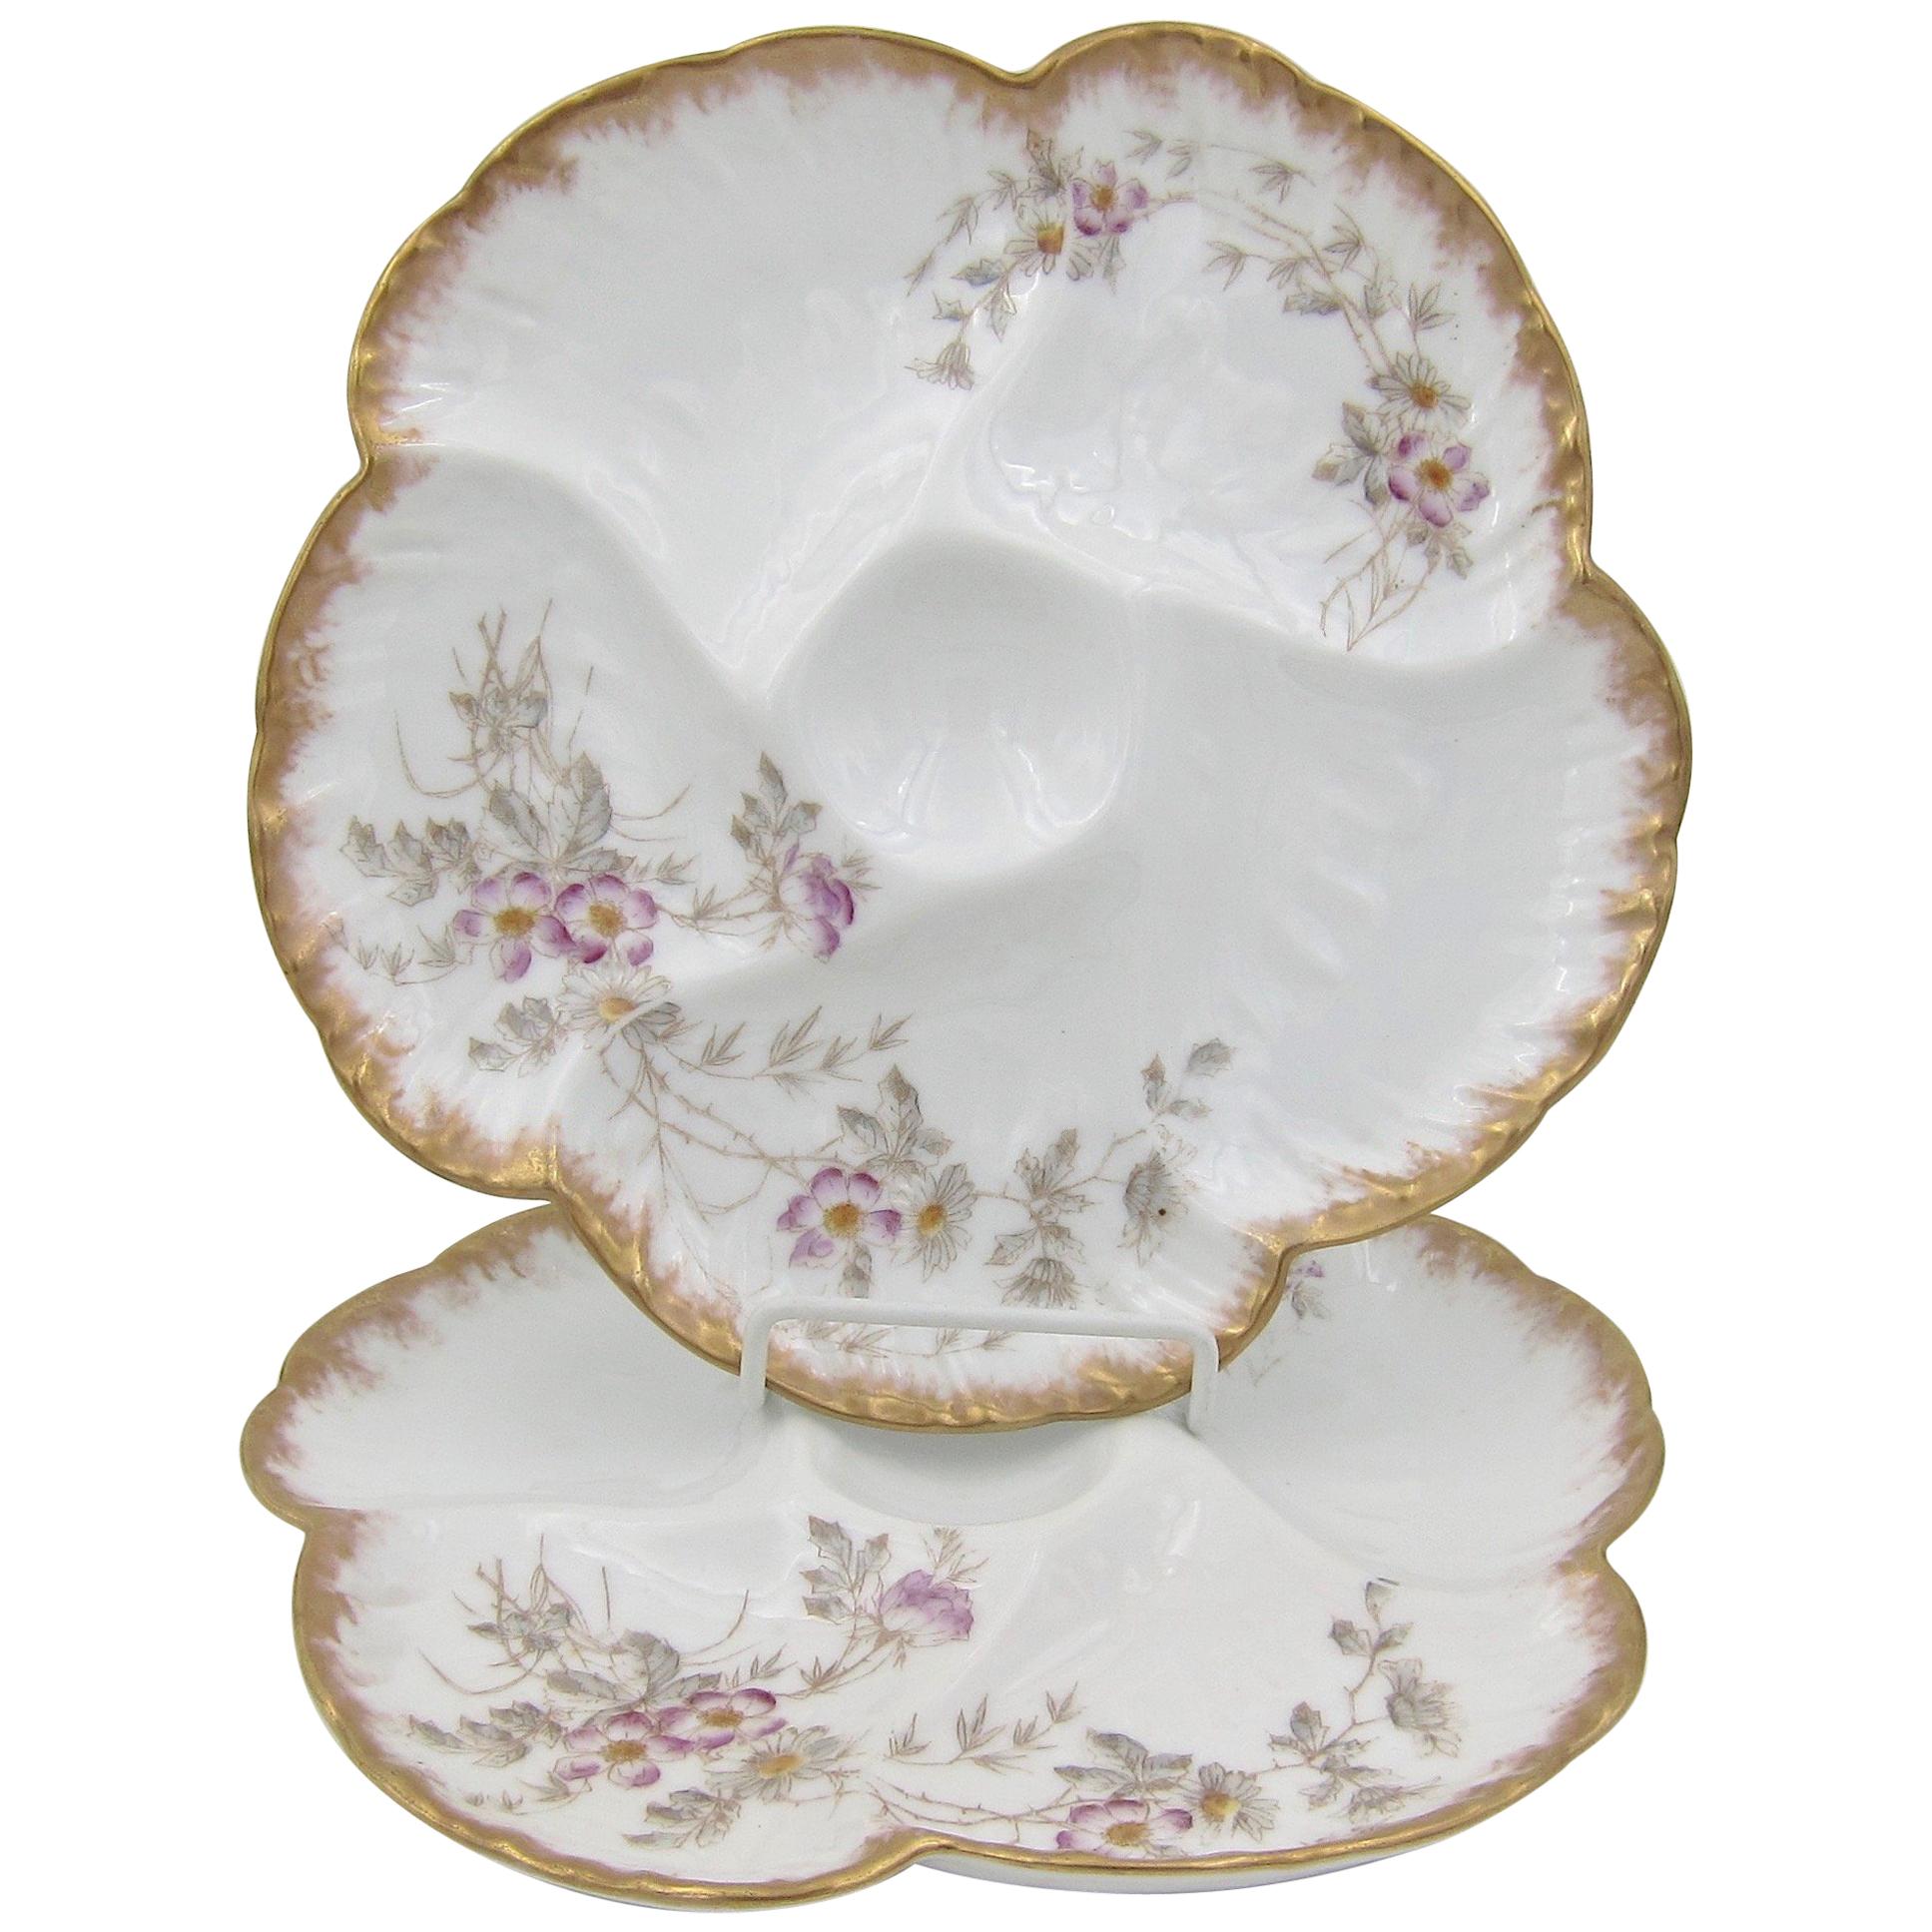 Antique Limoges Porcelain French Oyster Plate Pair, 1880s